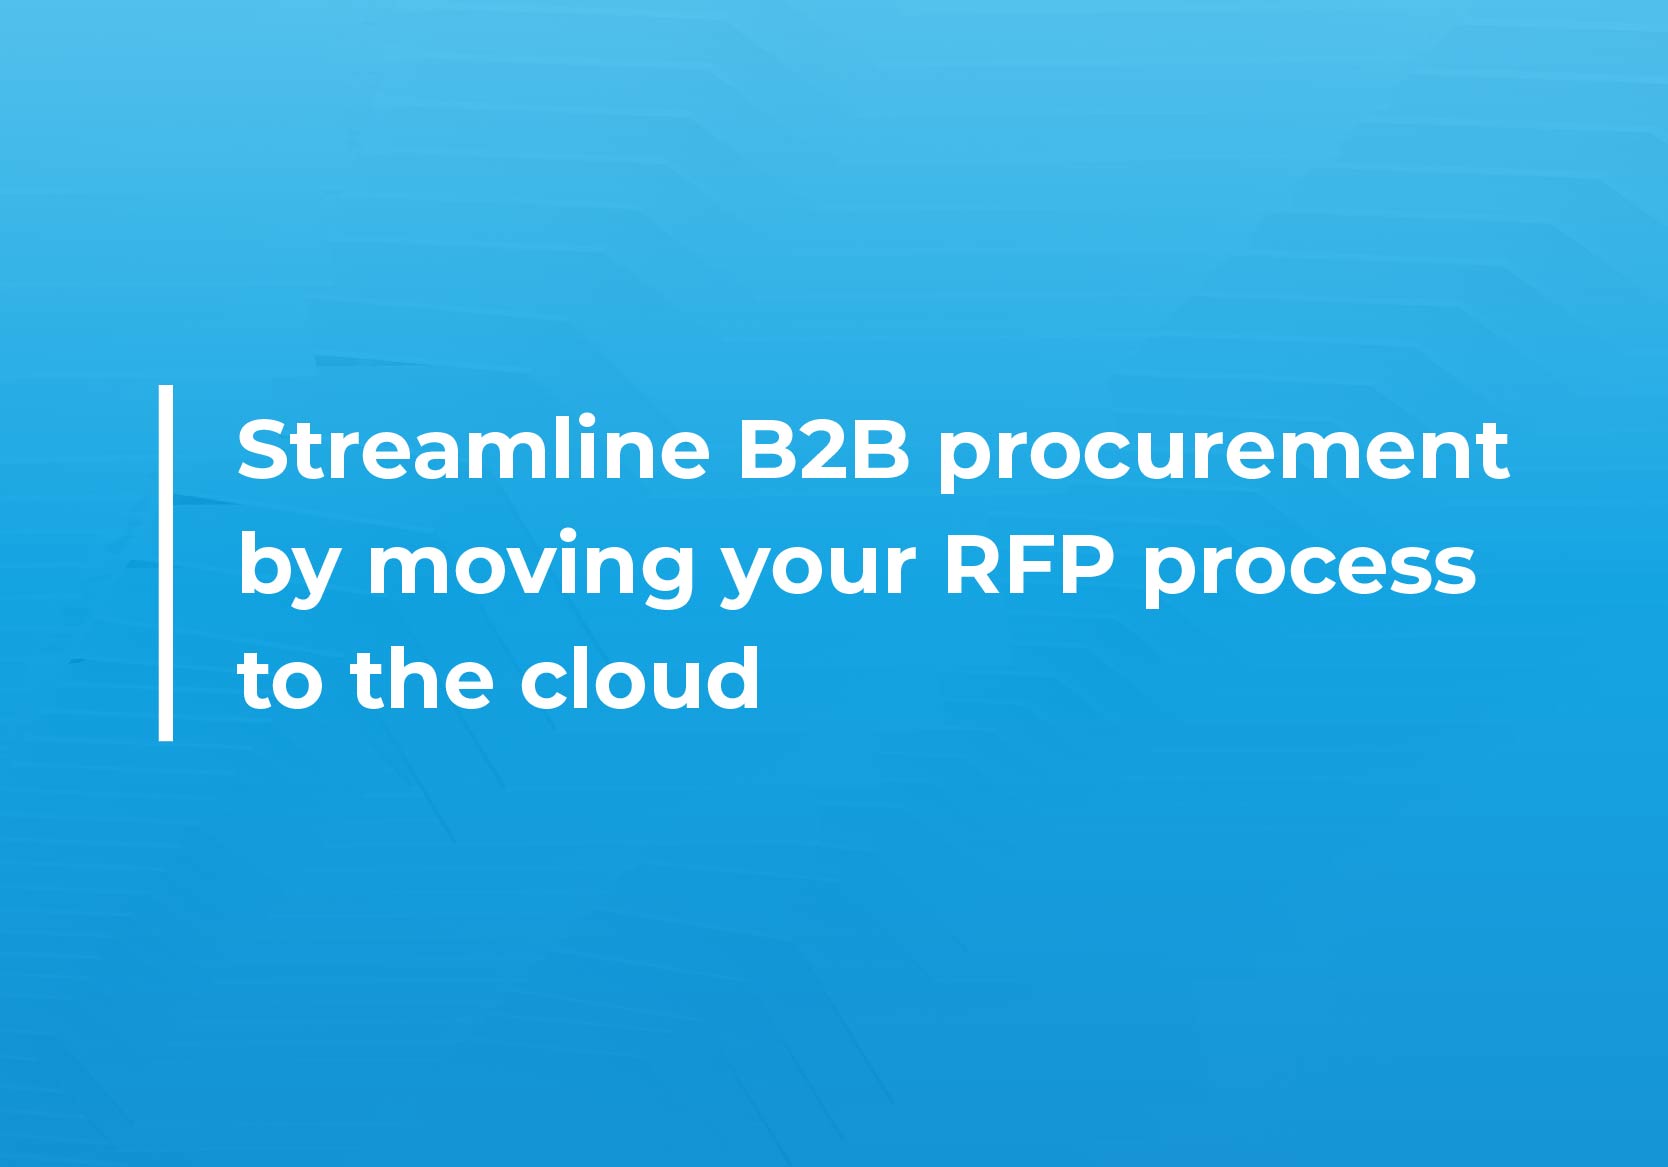 Streamline B2B Procurement By Moving Your RFP Process To the Cloud